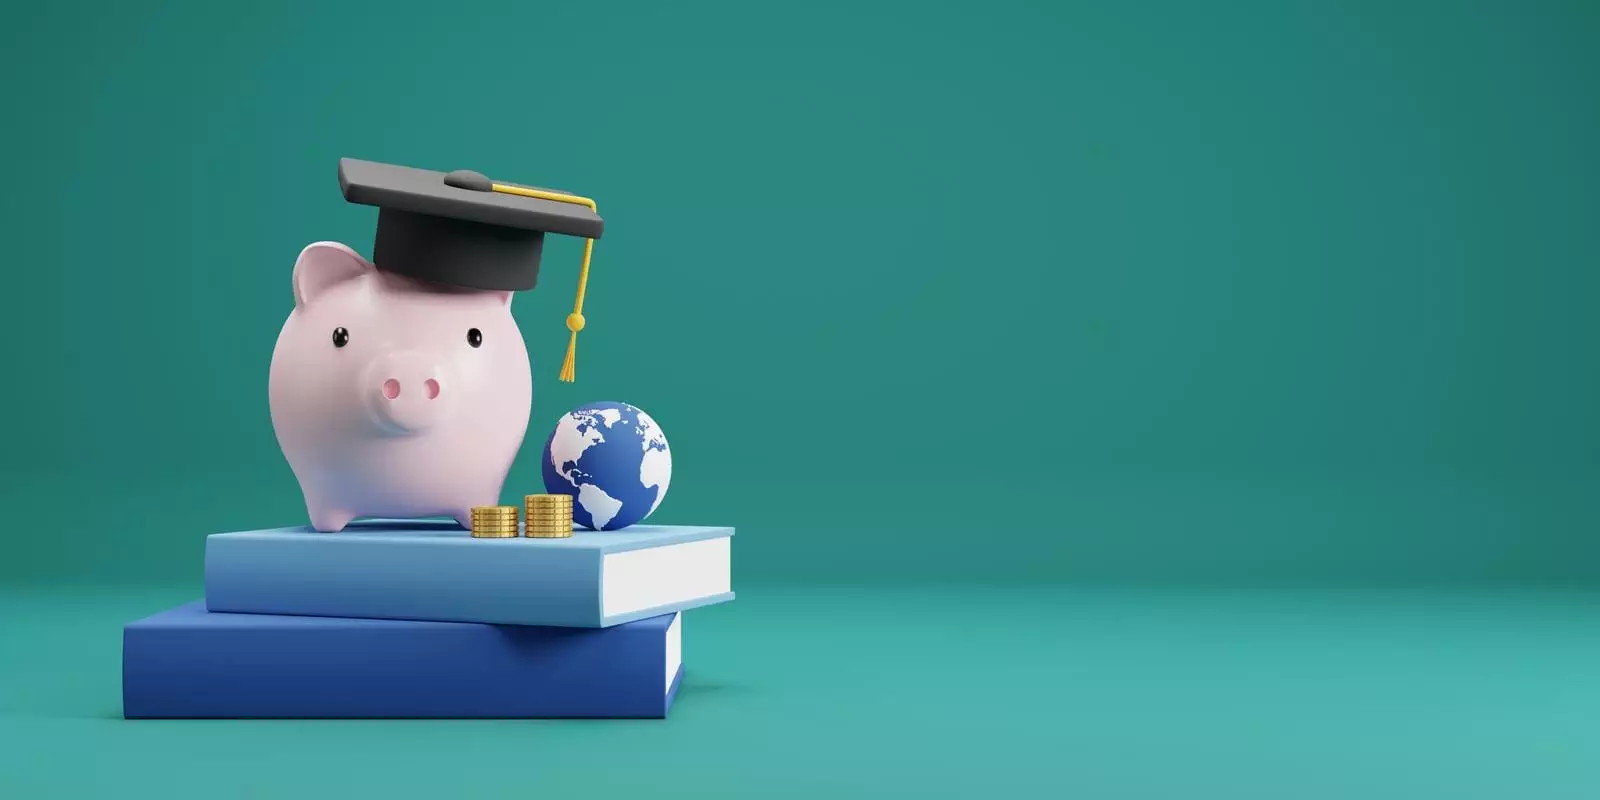 Investment education and scholarships concept. A design of a piggy bank with a graduation hat on the book.